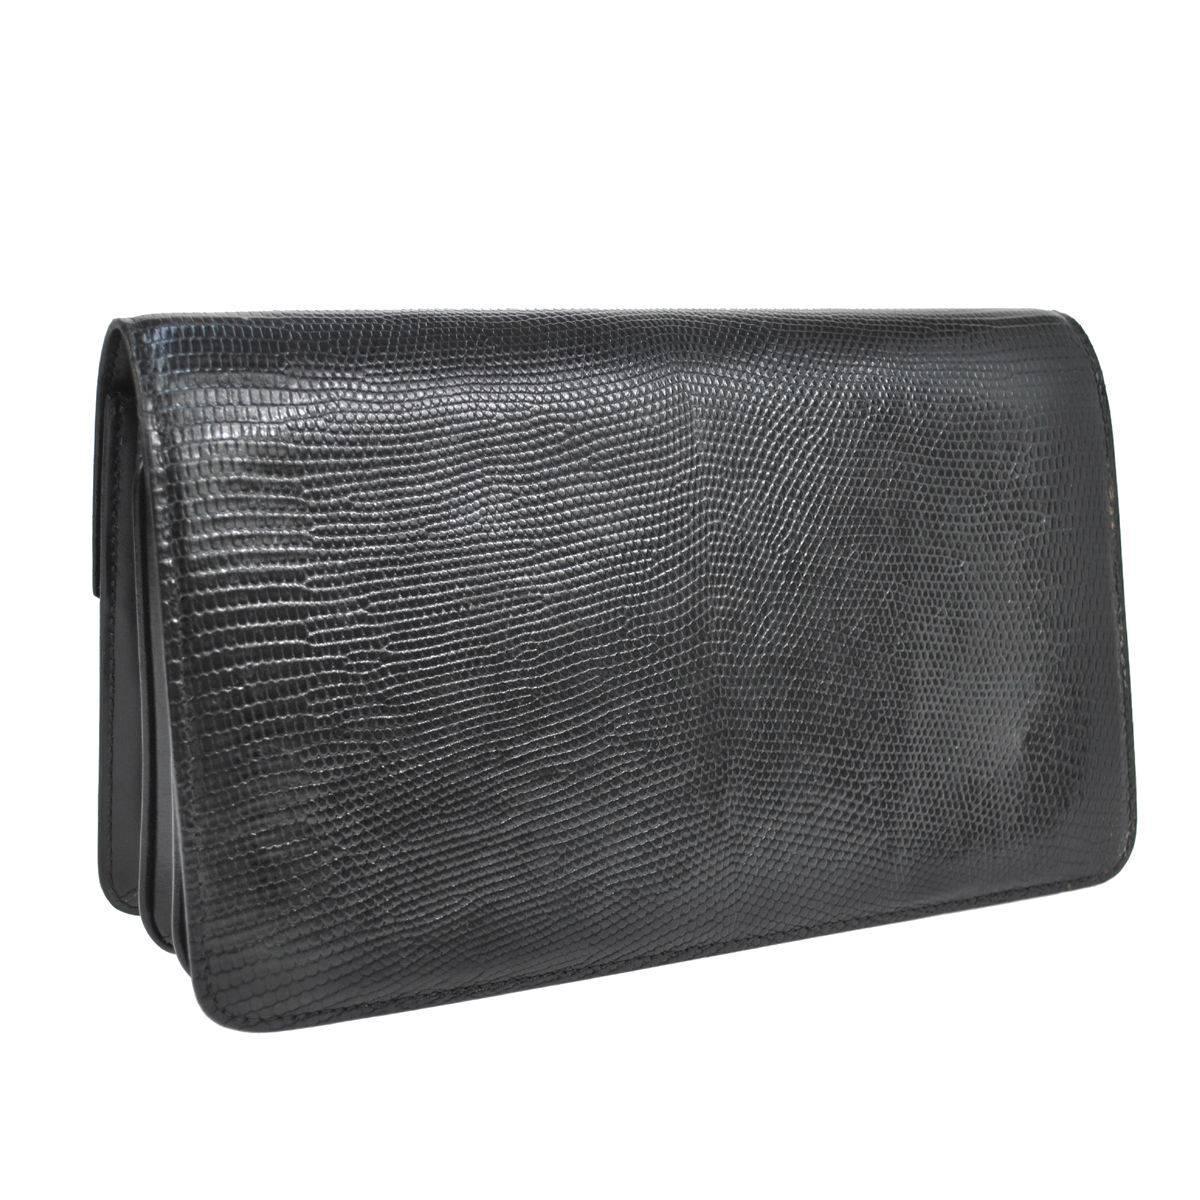 Gucci Black Embossed Leather Gold GG Evening Envelope Accordion Clutch Bag For Sale at 1stdibs